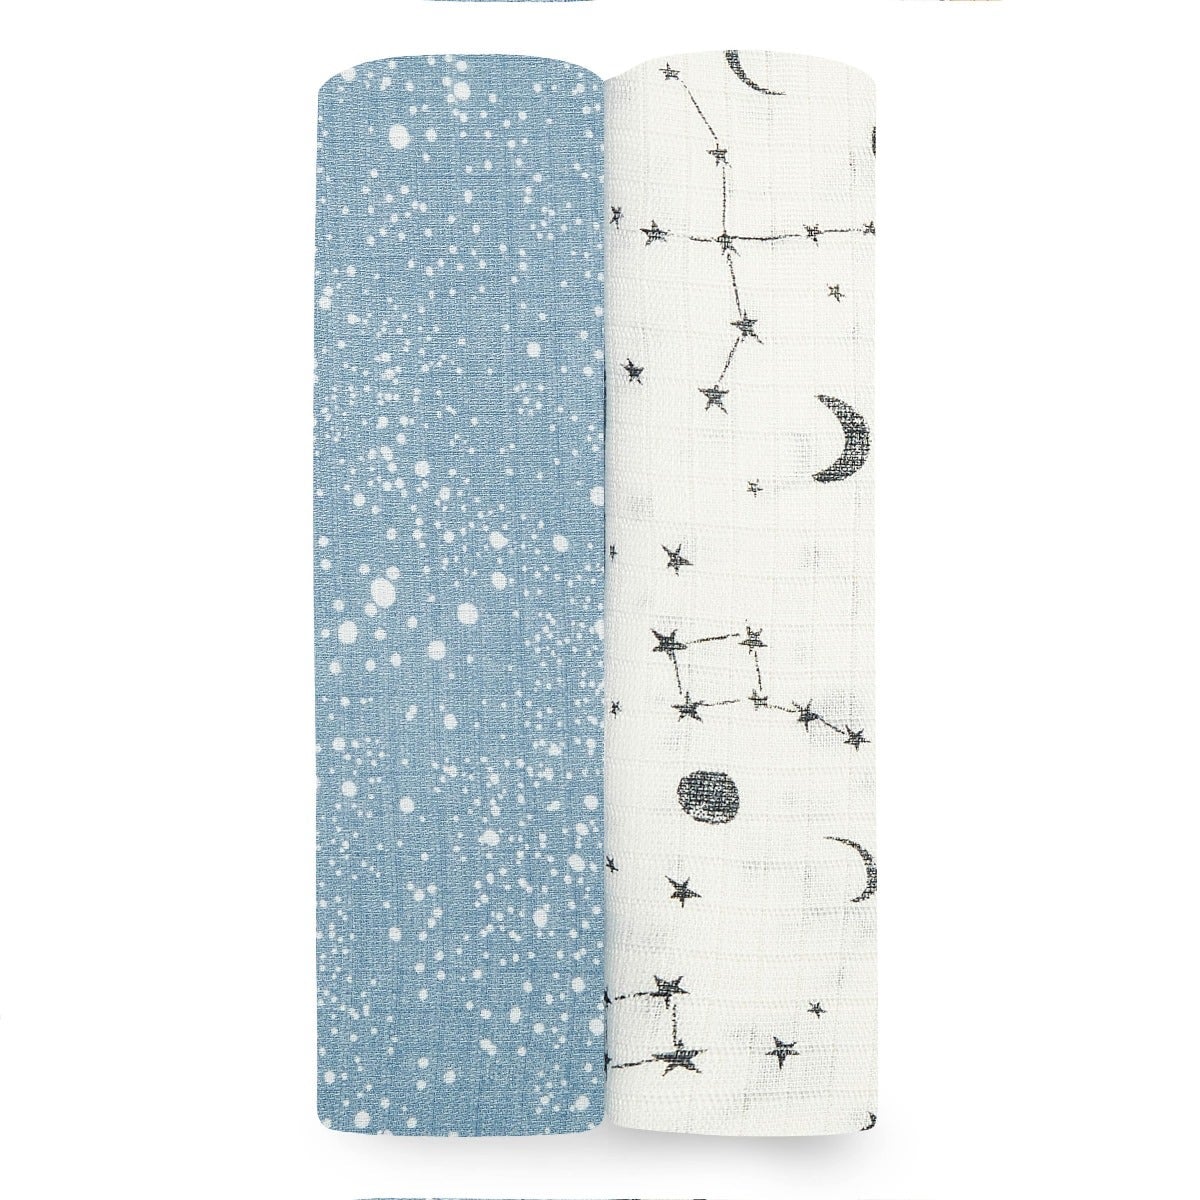 Aden & Anais Infant Essentials Silky Soft Swaddle Blankets, Cosmic Galaxy, 2-pack - ANB Baby -$20 - $50